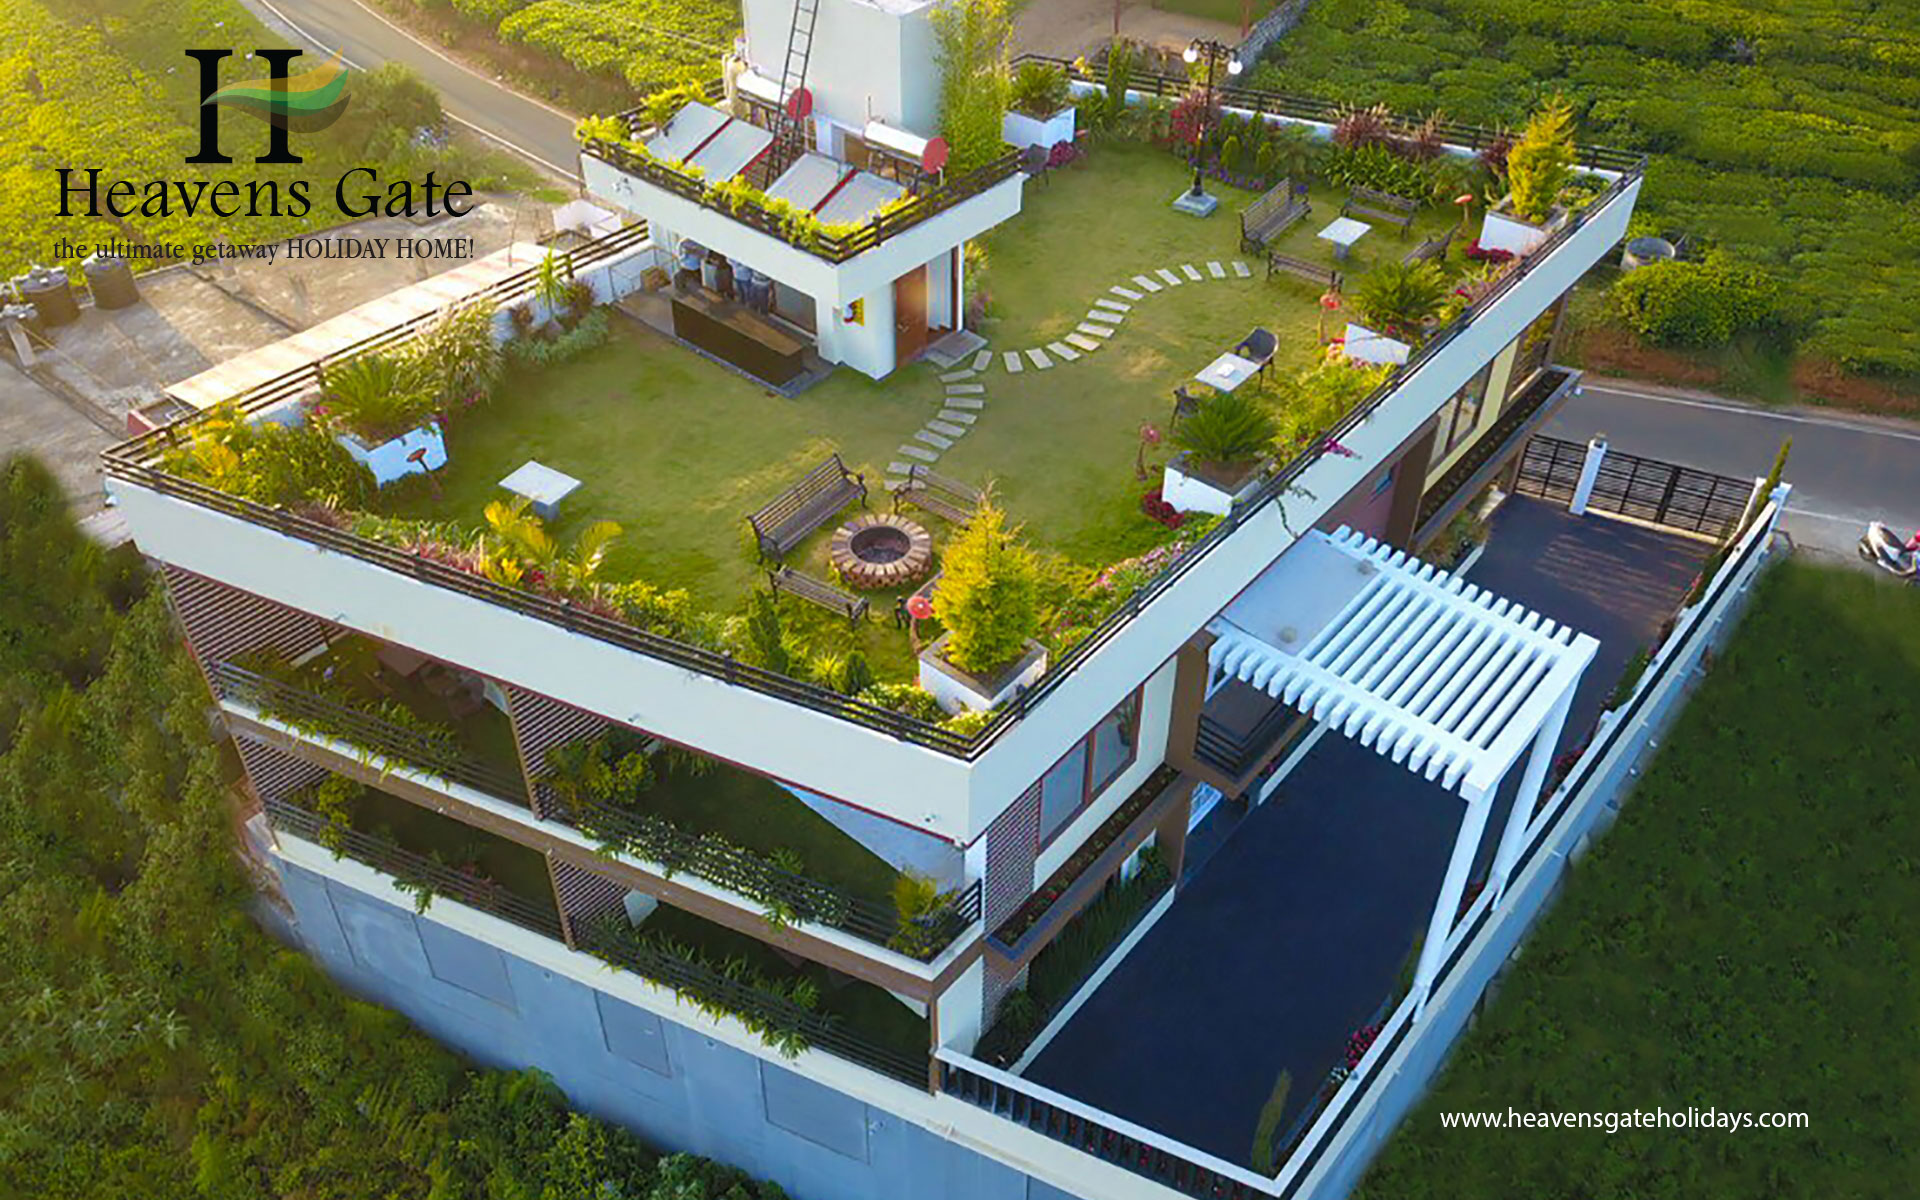 One of a kind Roof-top garden